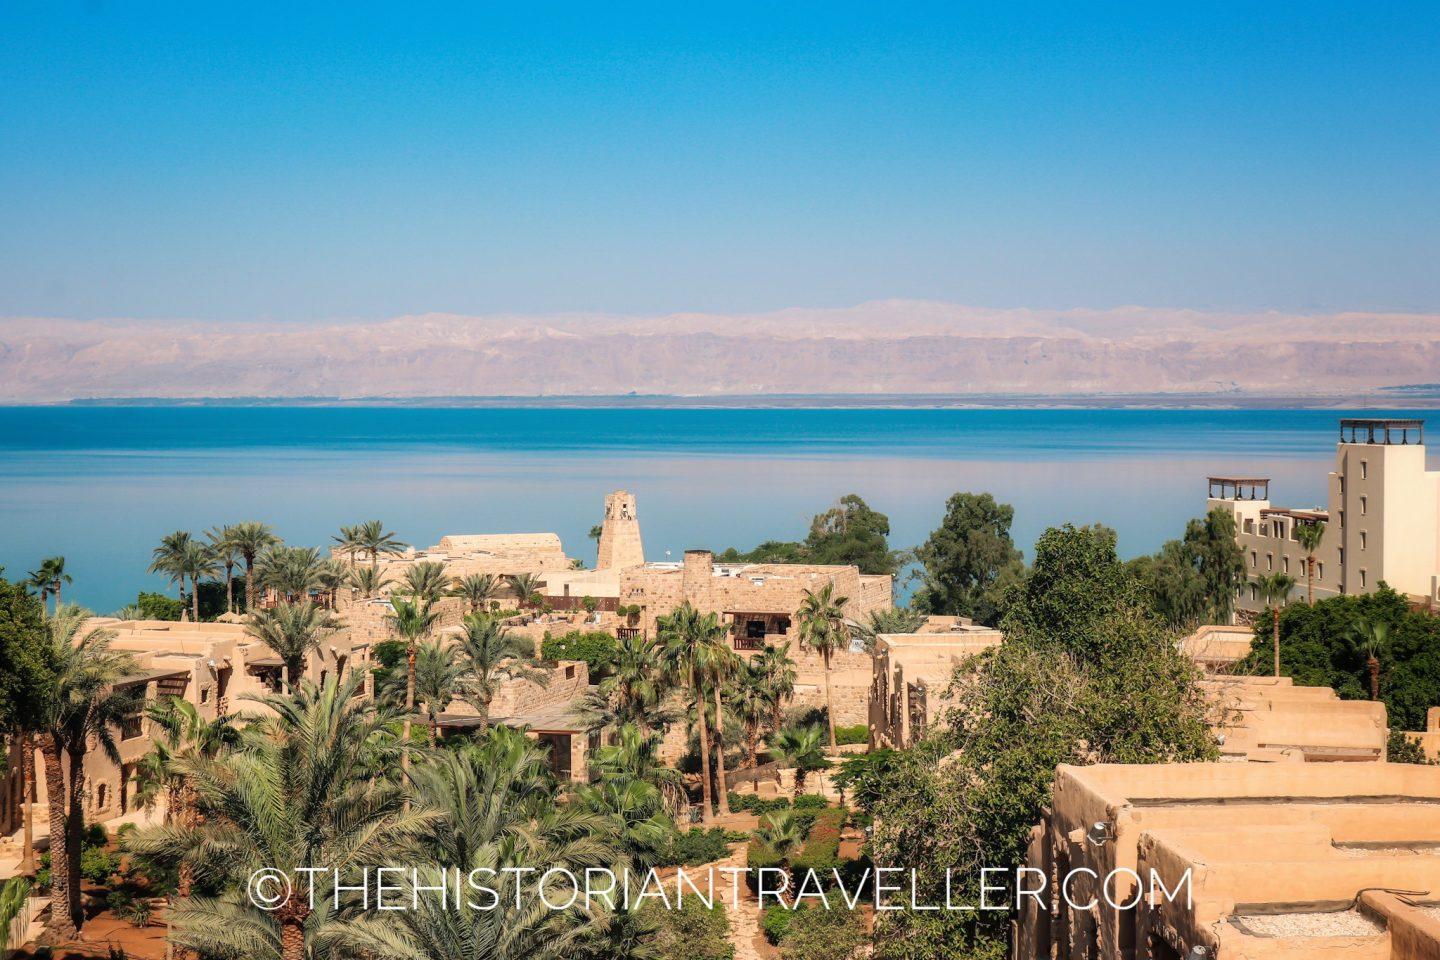 View from our window at the Movenpick Dead Sea. On a clear day you can see Israel on the other side of the Dead Sea!